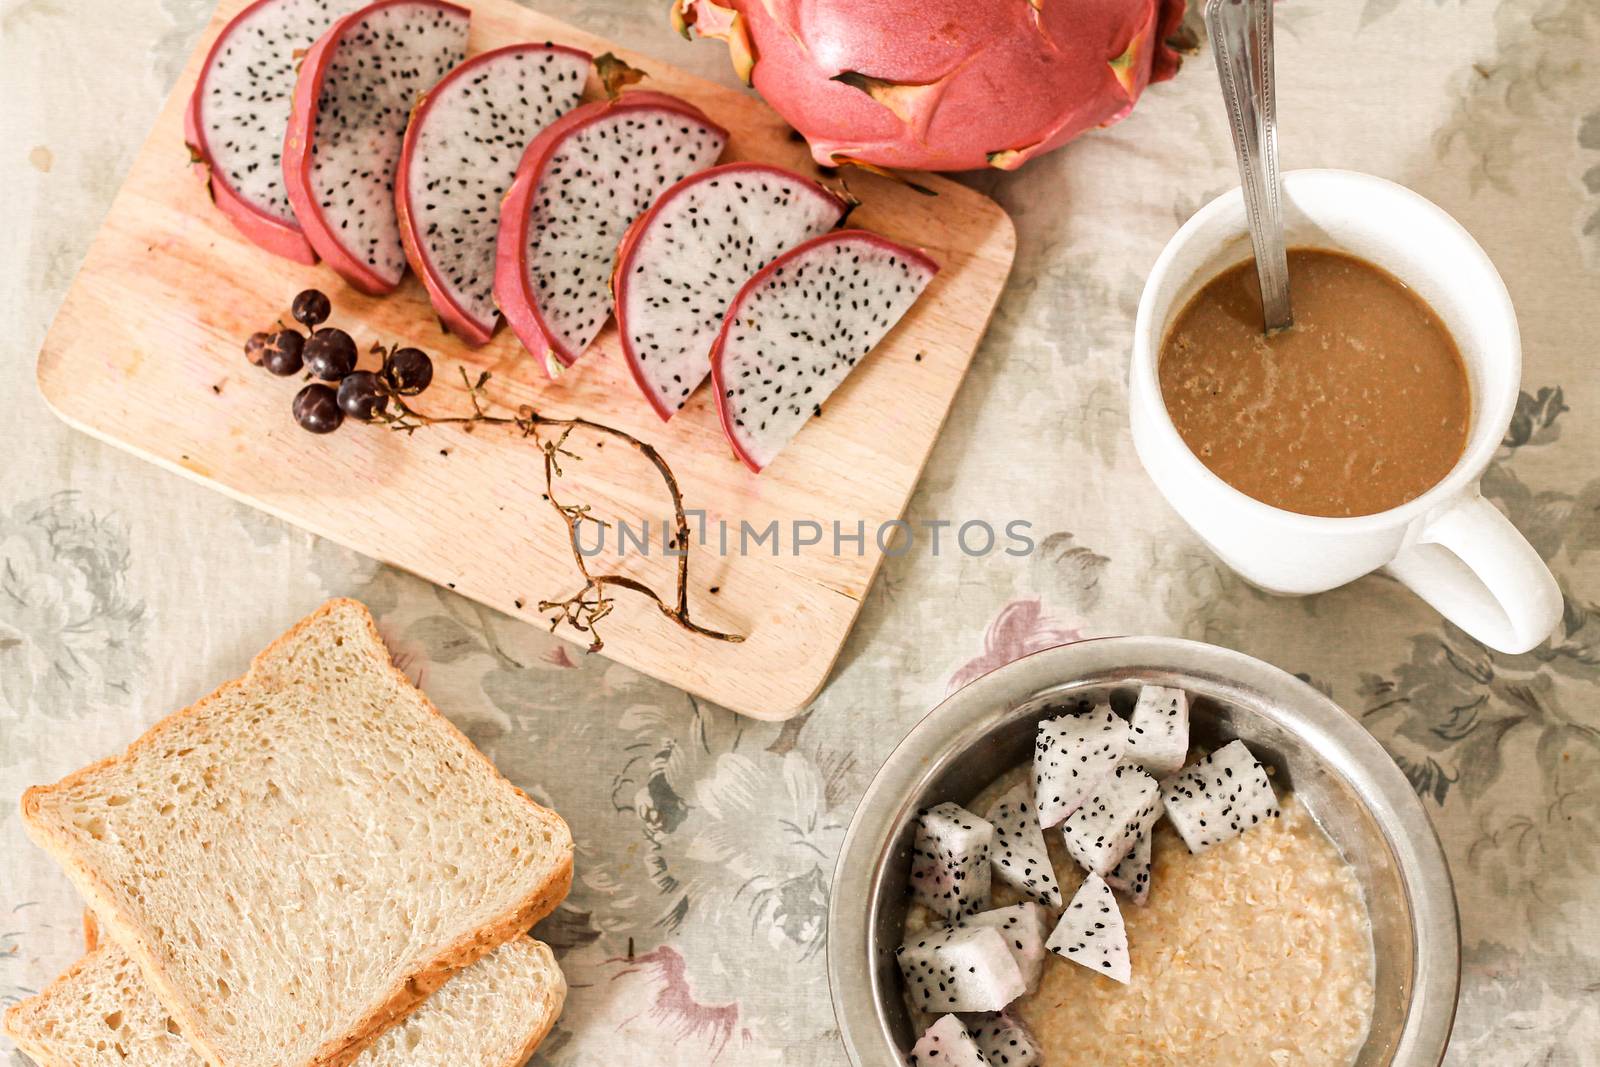 Healthy vegan breakfast of a bowl of oatmeal topped with dragon fruit slices served with whole wheat bread and coffee